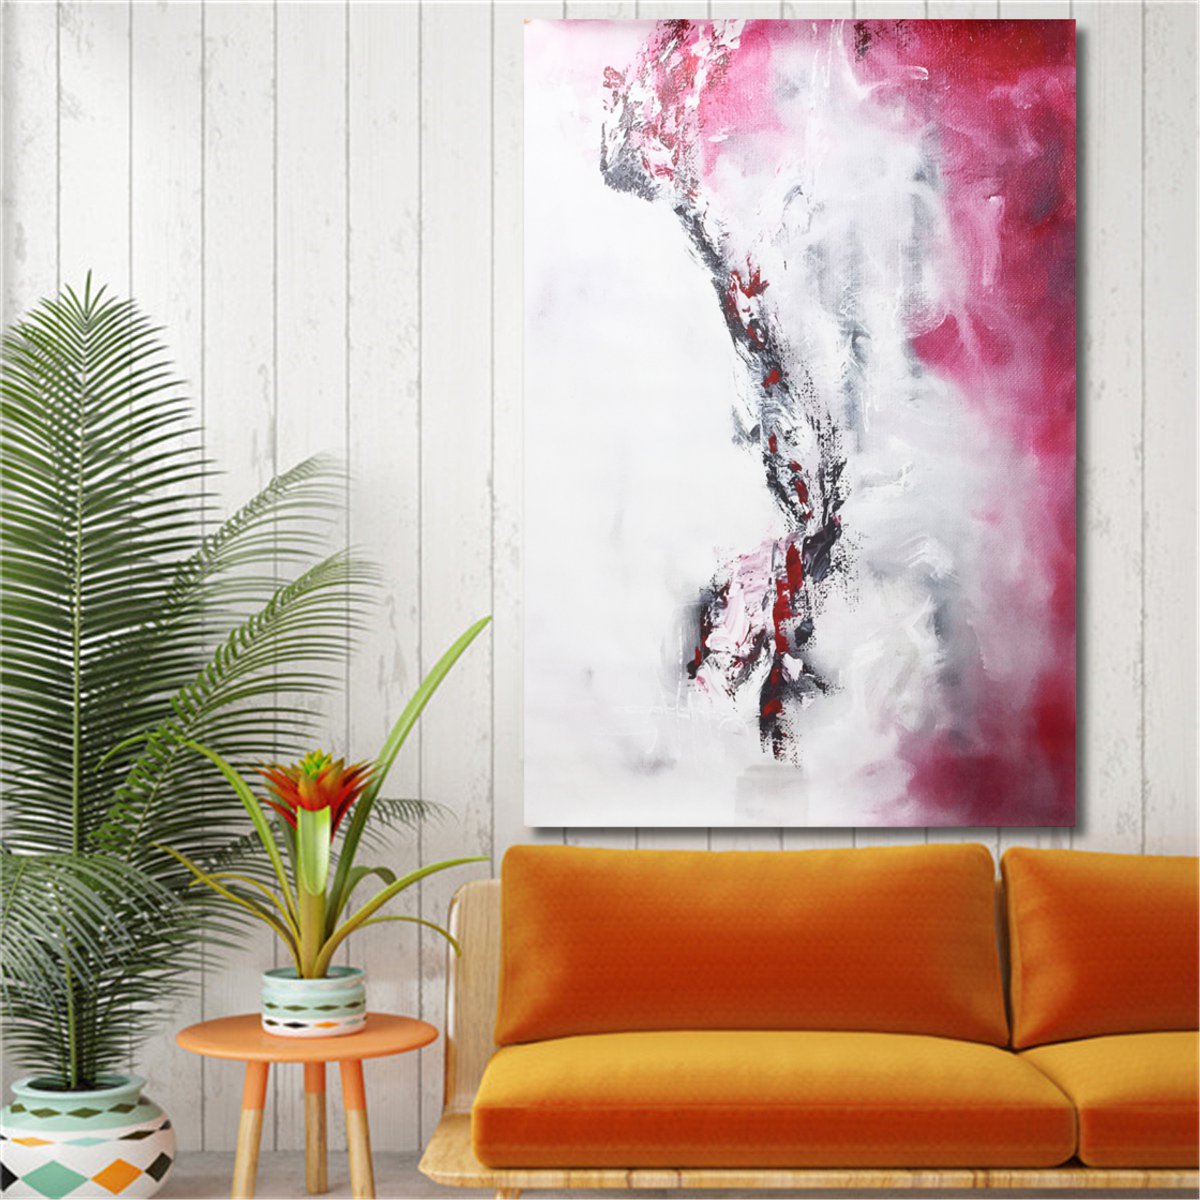 Modern-Abstract-Canvas-Oil-Print-Paintings-Home-Wall-Poster-Decor-Unframed-1344557-2